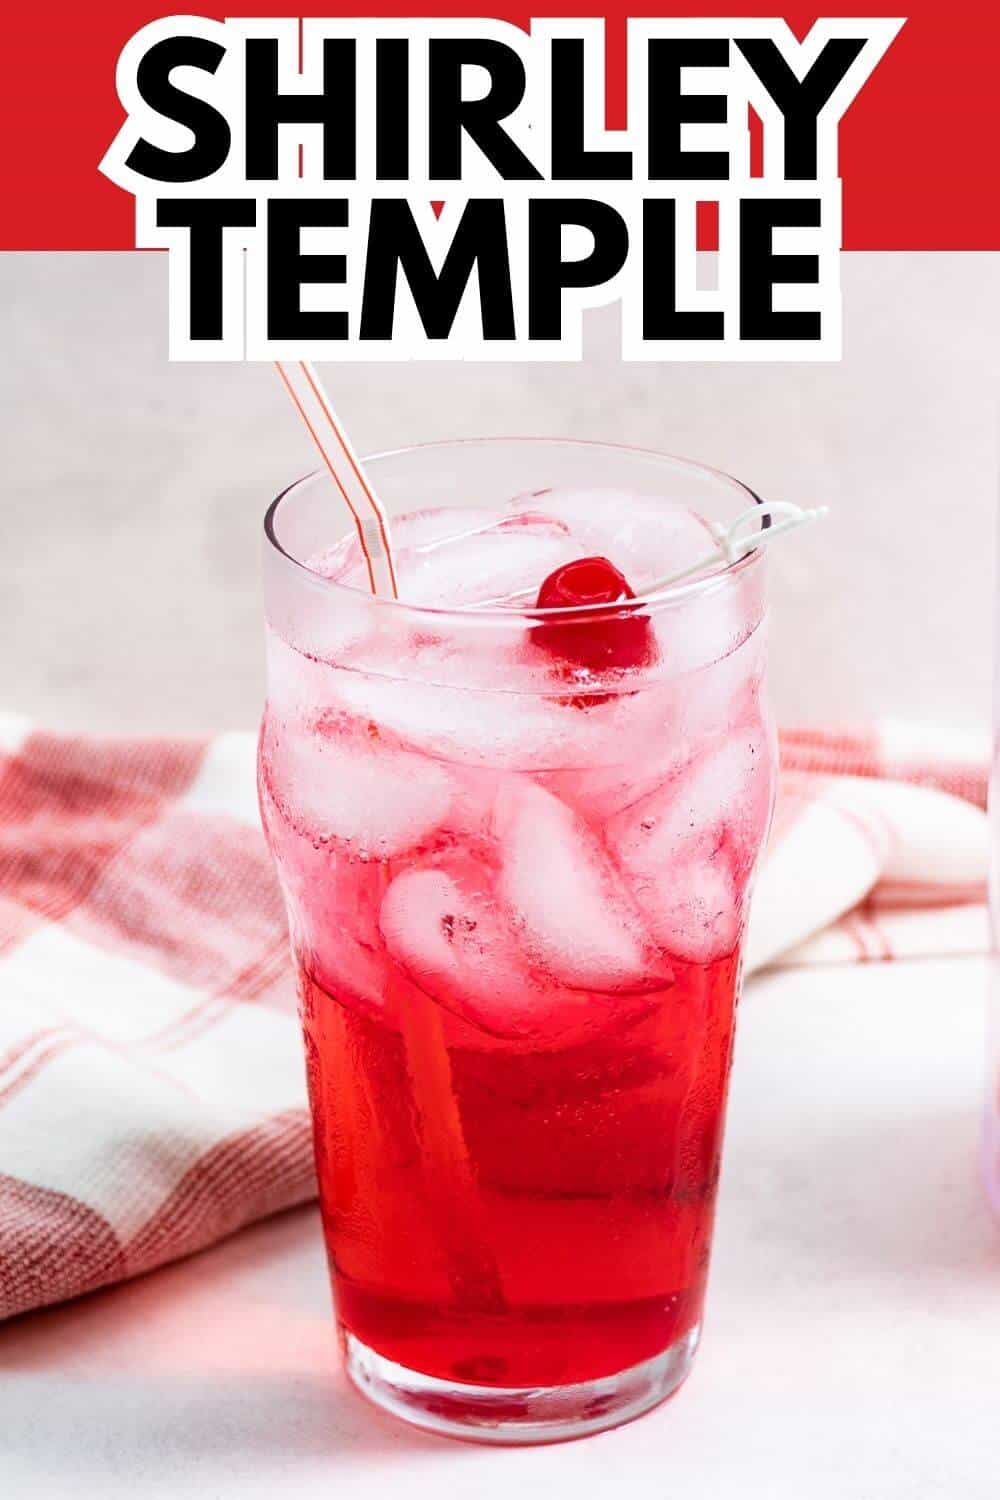 Shirley Temple drink with recipe title text overlay.